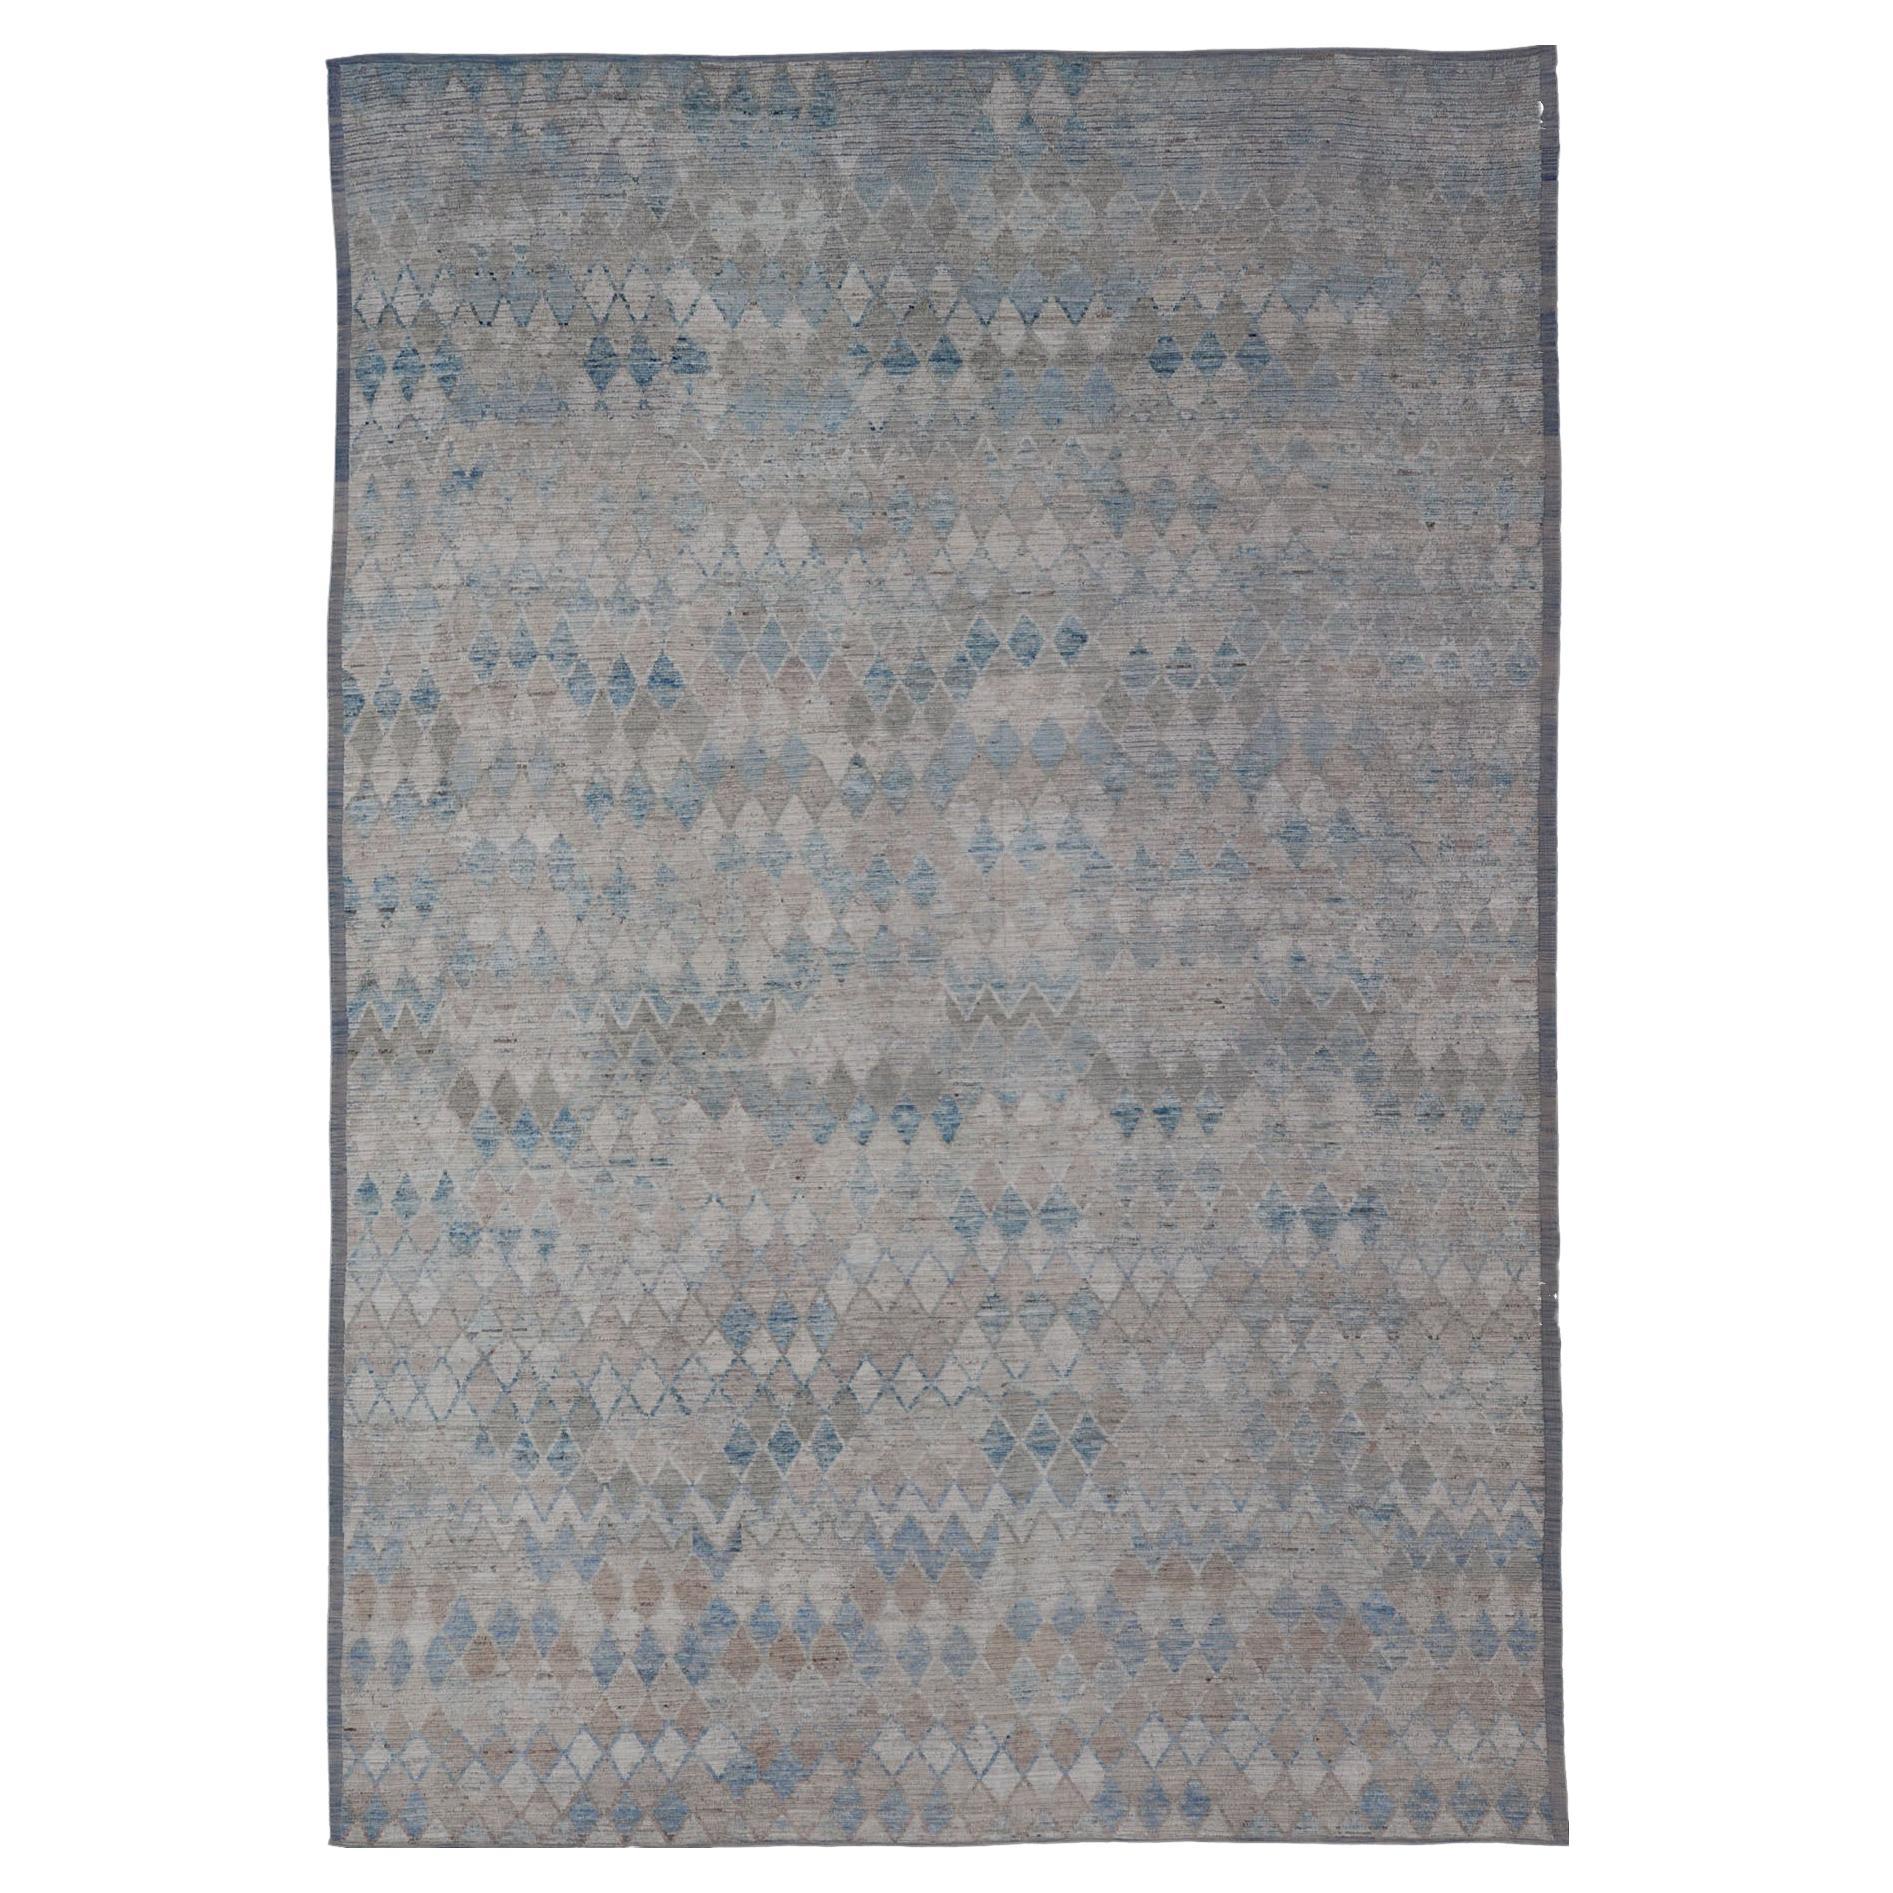 Oversized Modern Casual All-Over Diamond Design in Blue, Taupe, and Cream For Sale